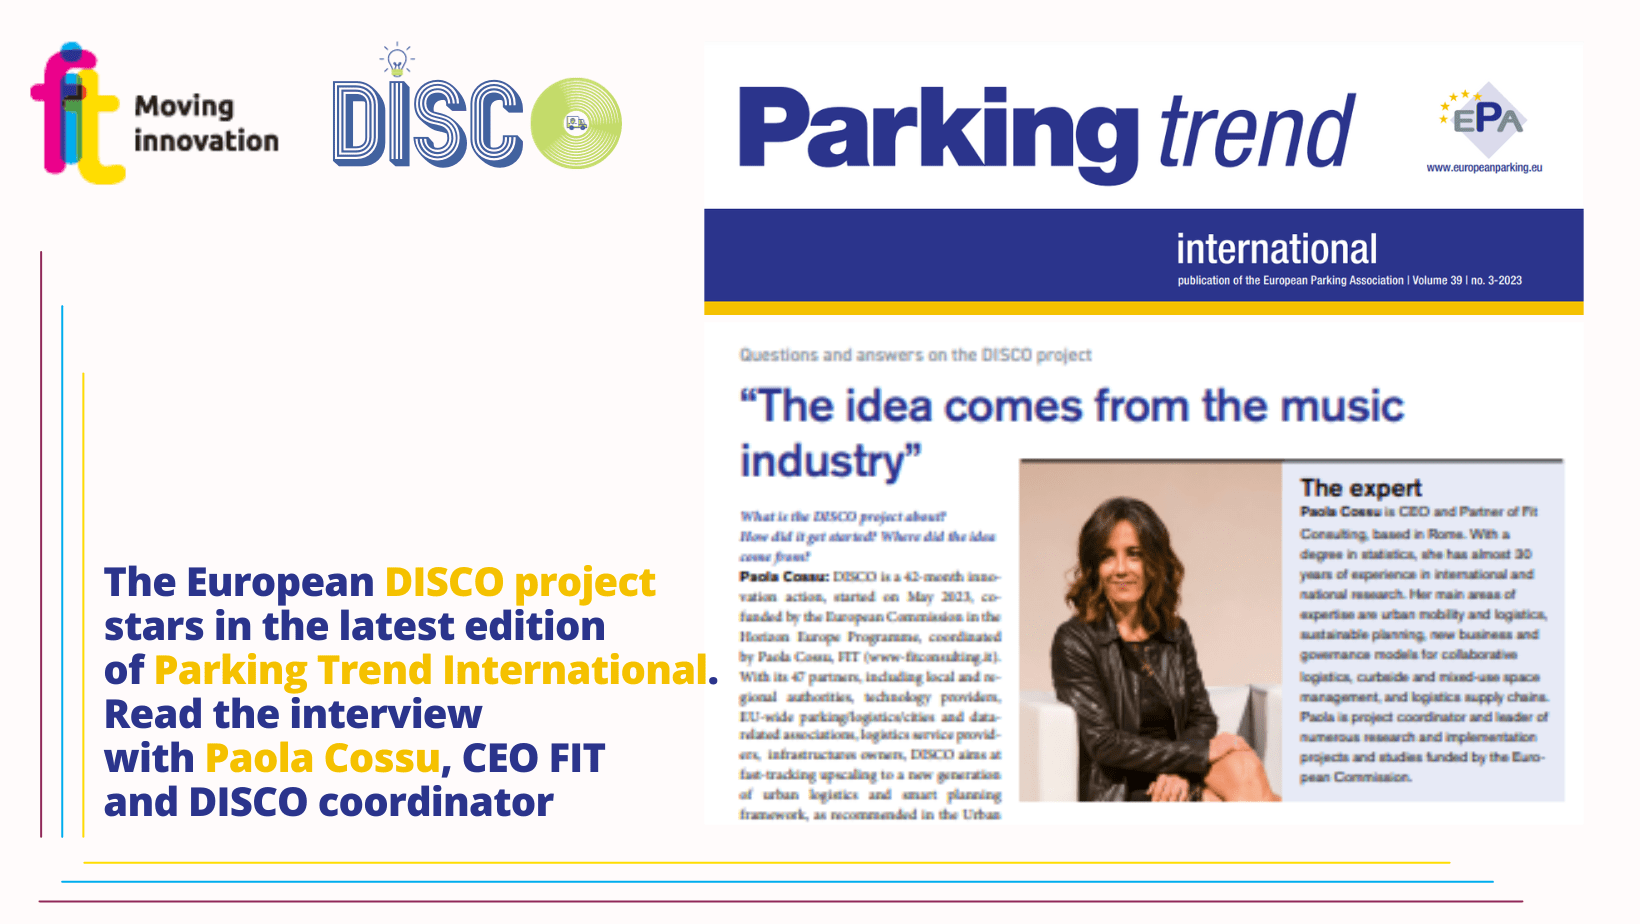 The European DISCO project stars in the latest edition of Parking Trend International. Read the interview with Paola Cossu